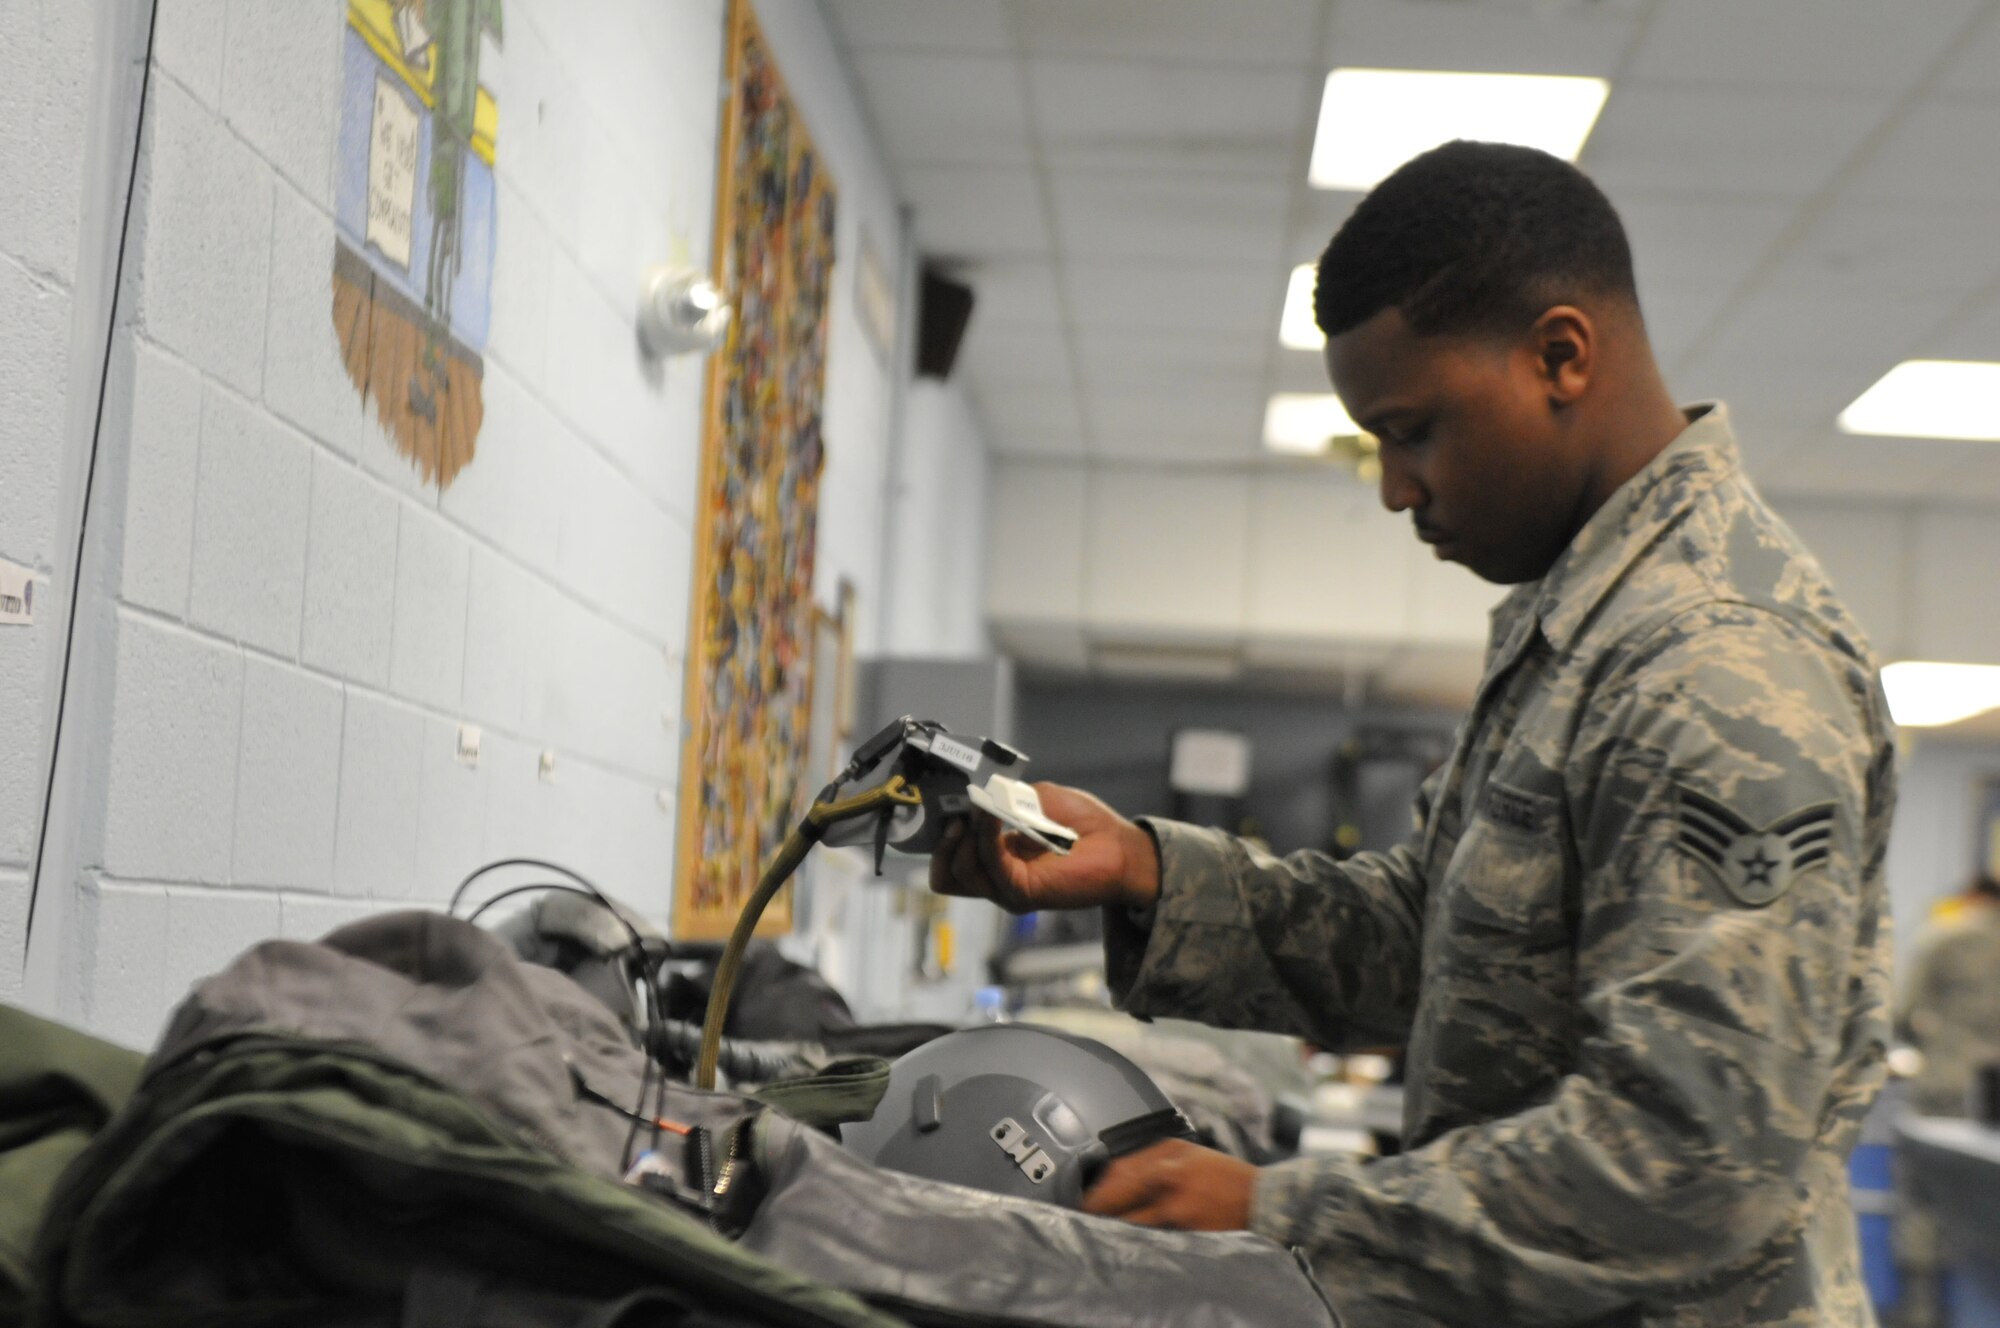 Senior Airman K'Shawn Joseph, 113th Operations Group Aircrew Flight Equipment technician, prepares pilots' equipment prior to a Familiarization Flight at Naval Air Station Joint Reserve Base New Orleans, La. The D.C. Air National Guard Airmen are participating in a two-week flying exercise titled Sentry Voodoo in New Orleans. (Air National Guard photo by Senior Airman Erica Rodriguez/Released)